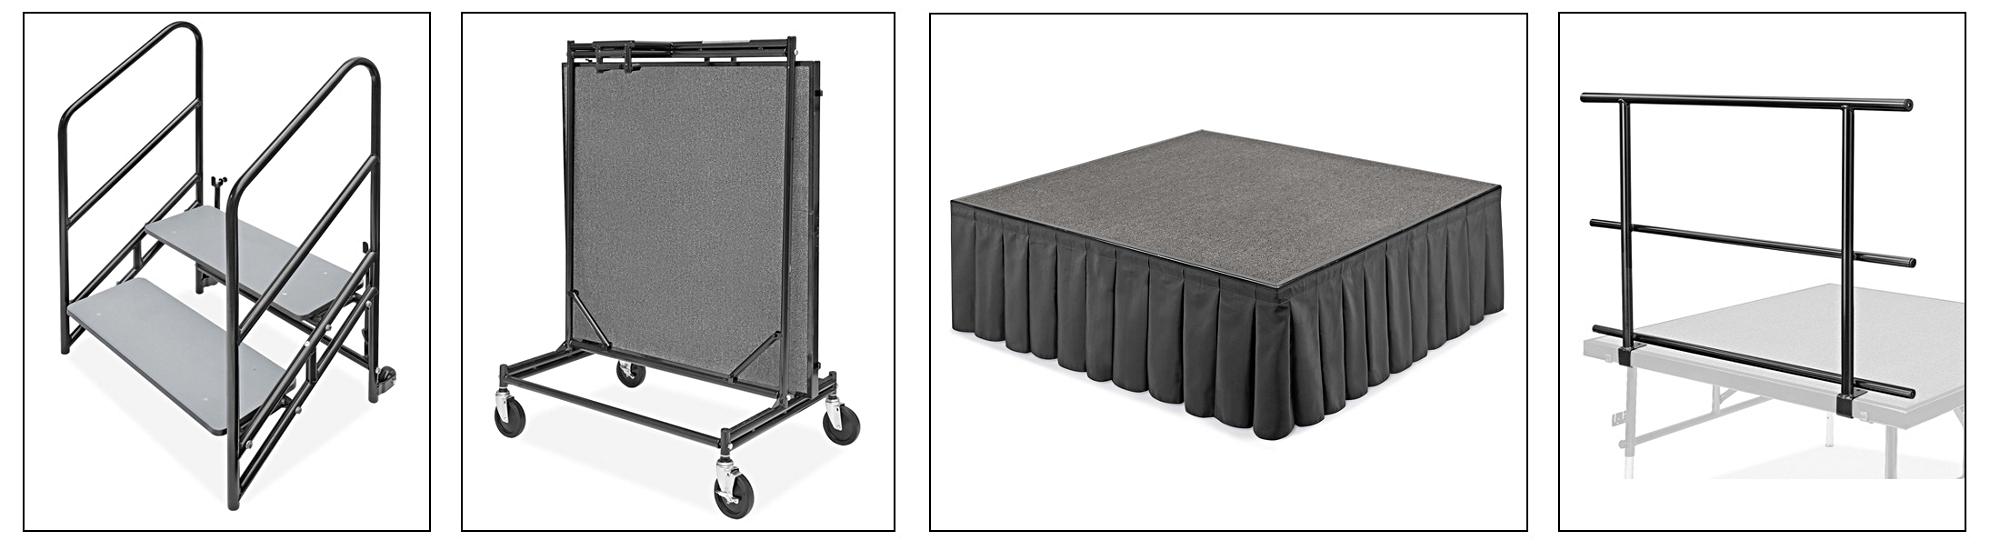 Portable Stage Accessories